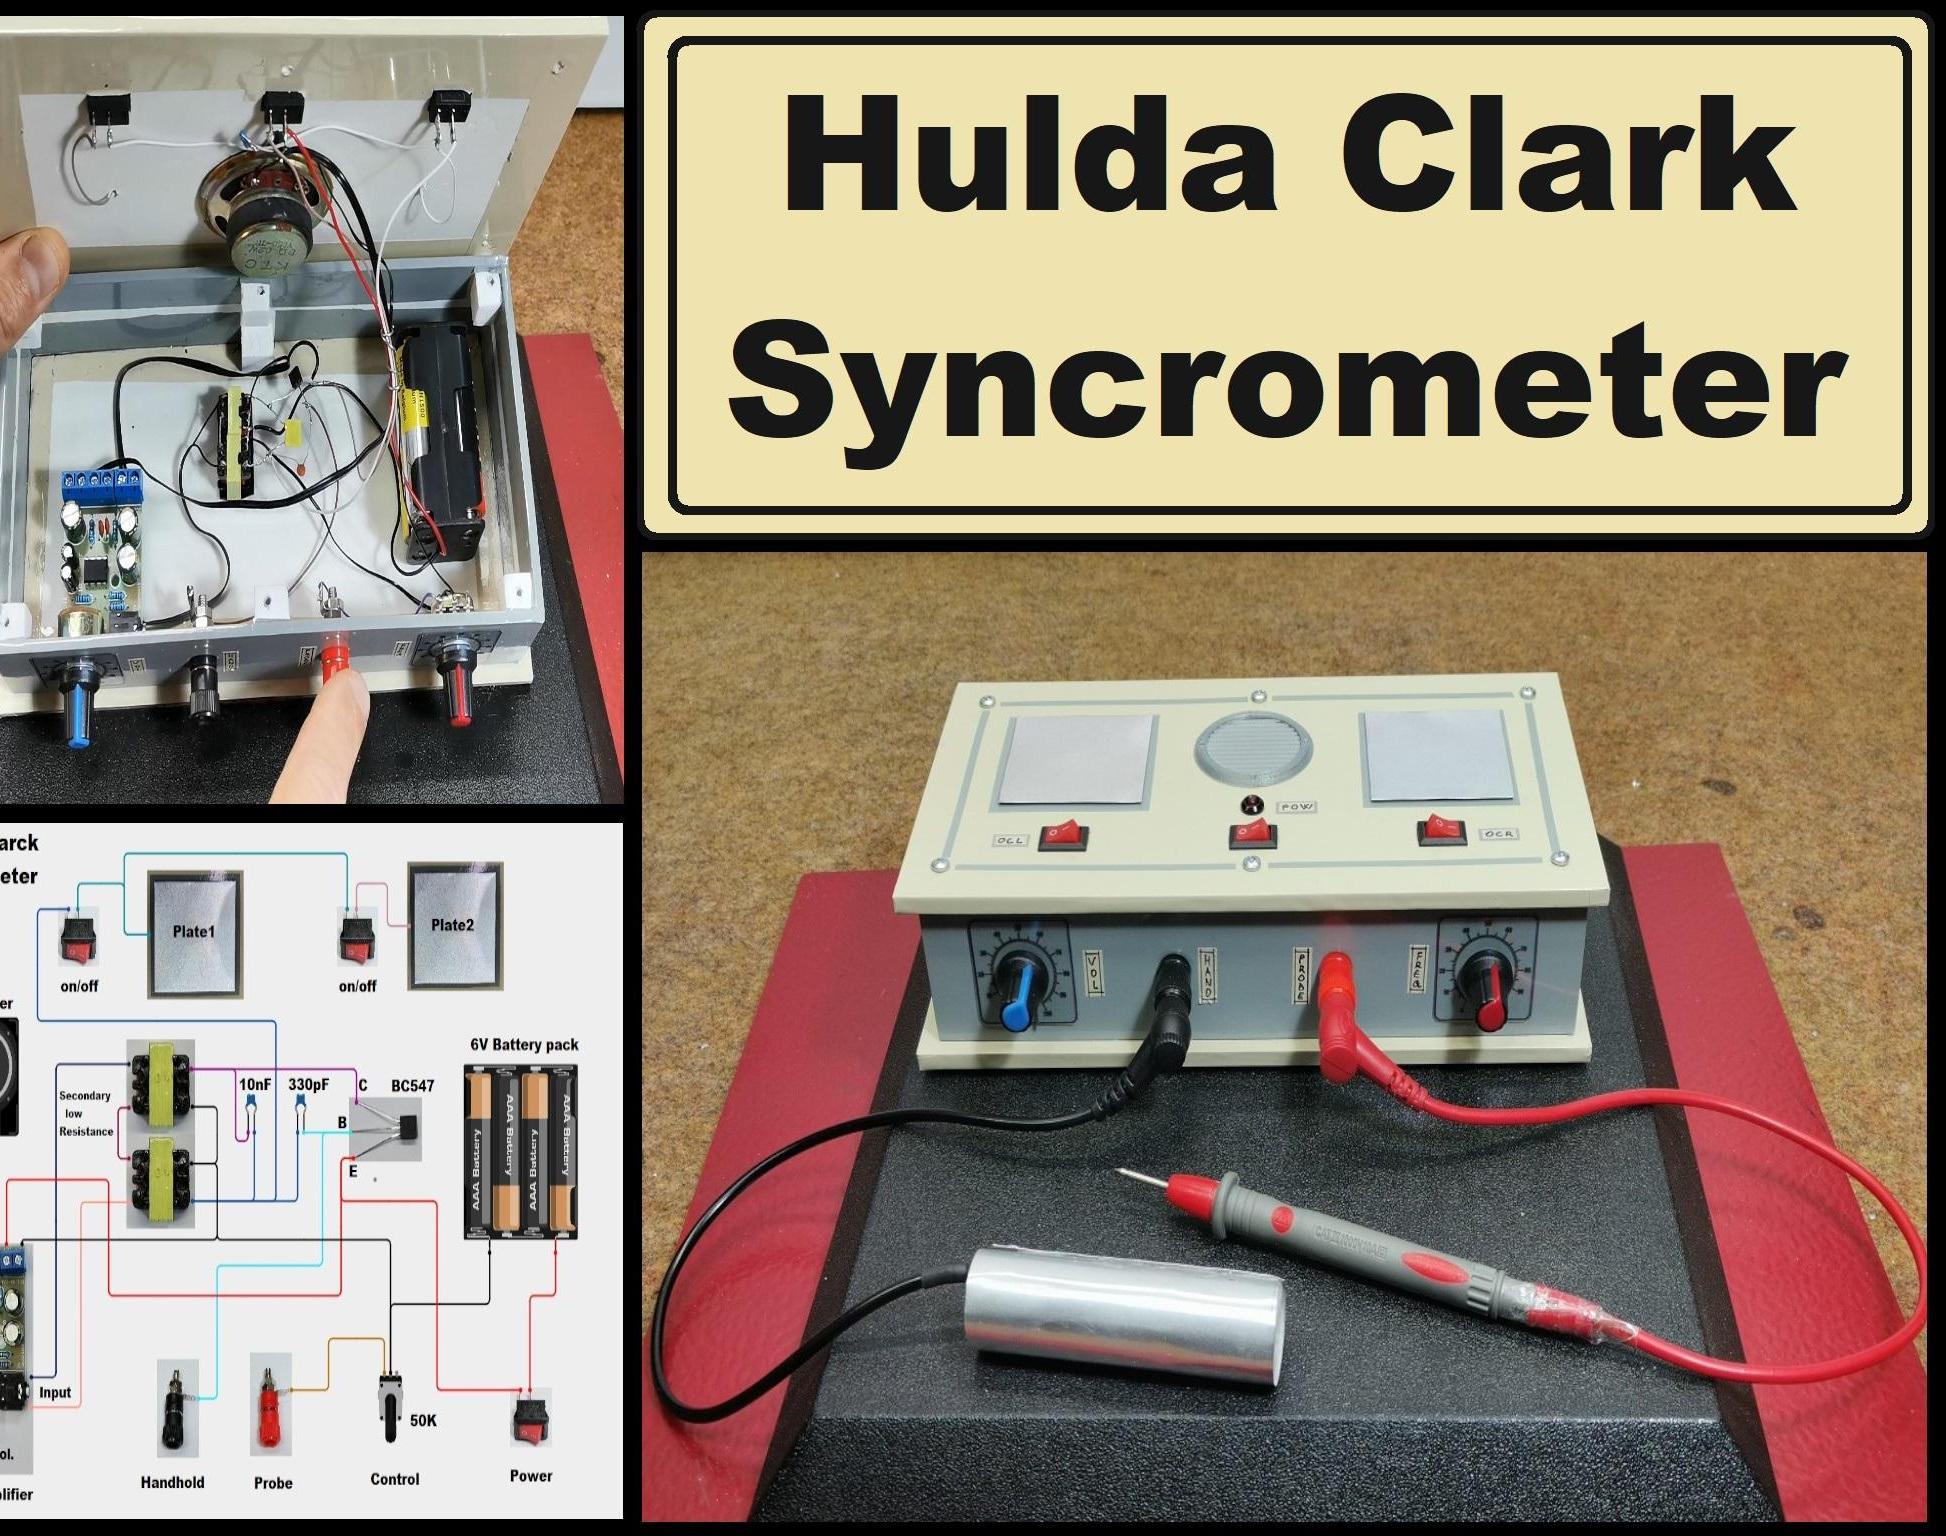 How to Build Simple Cheap Hulda Clark Syncrometer